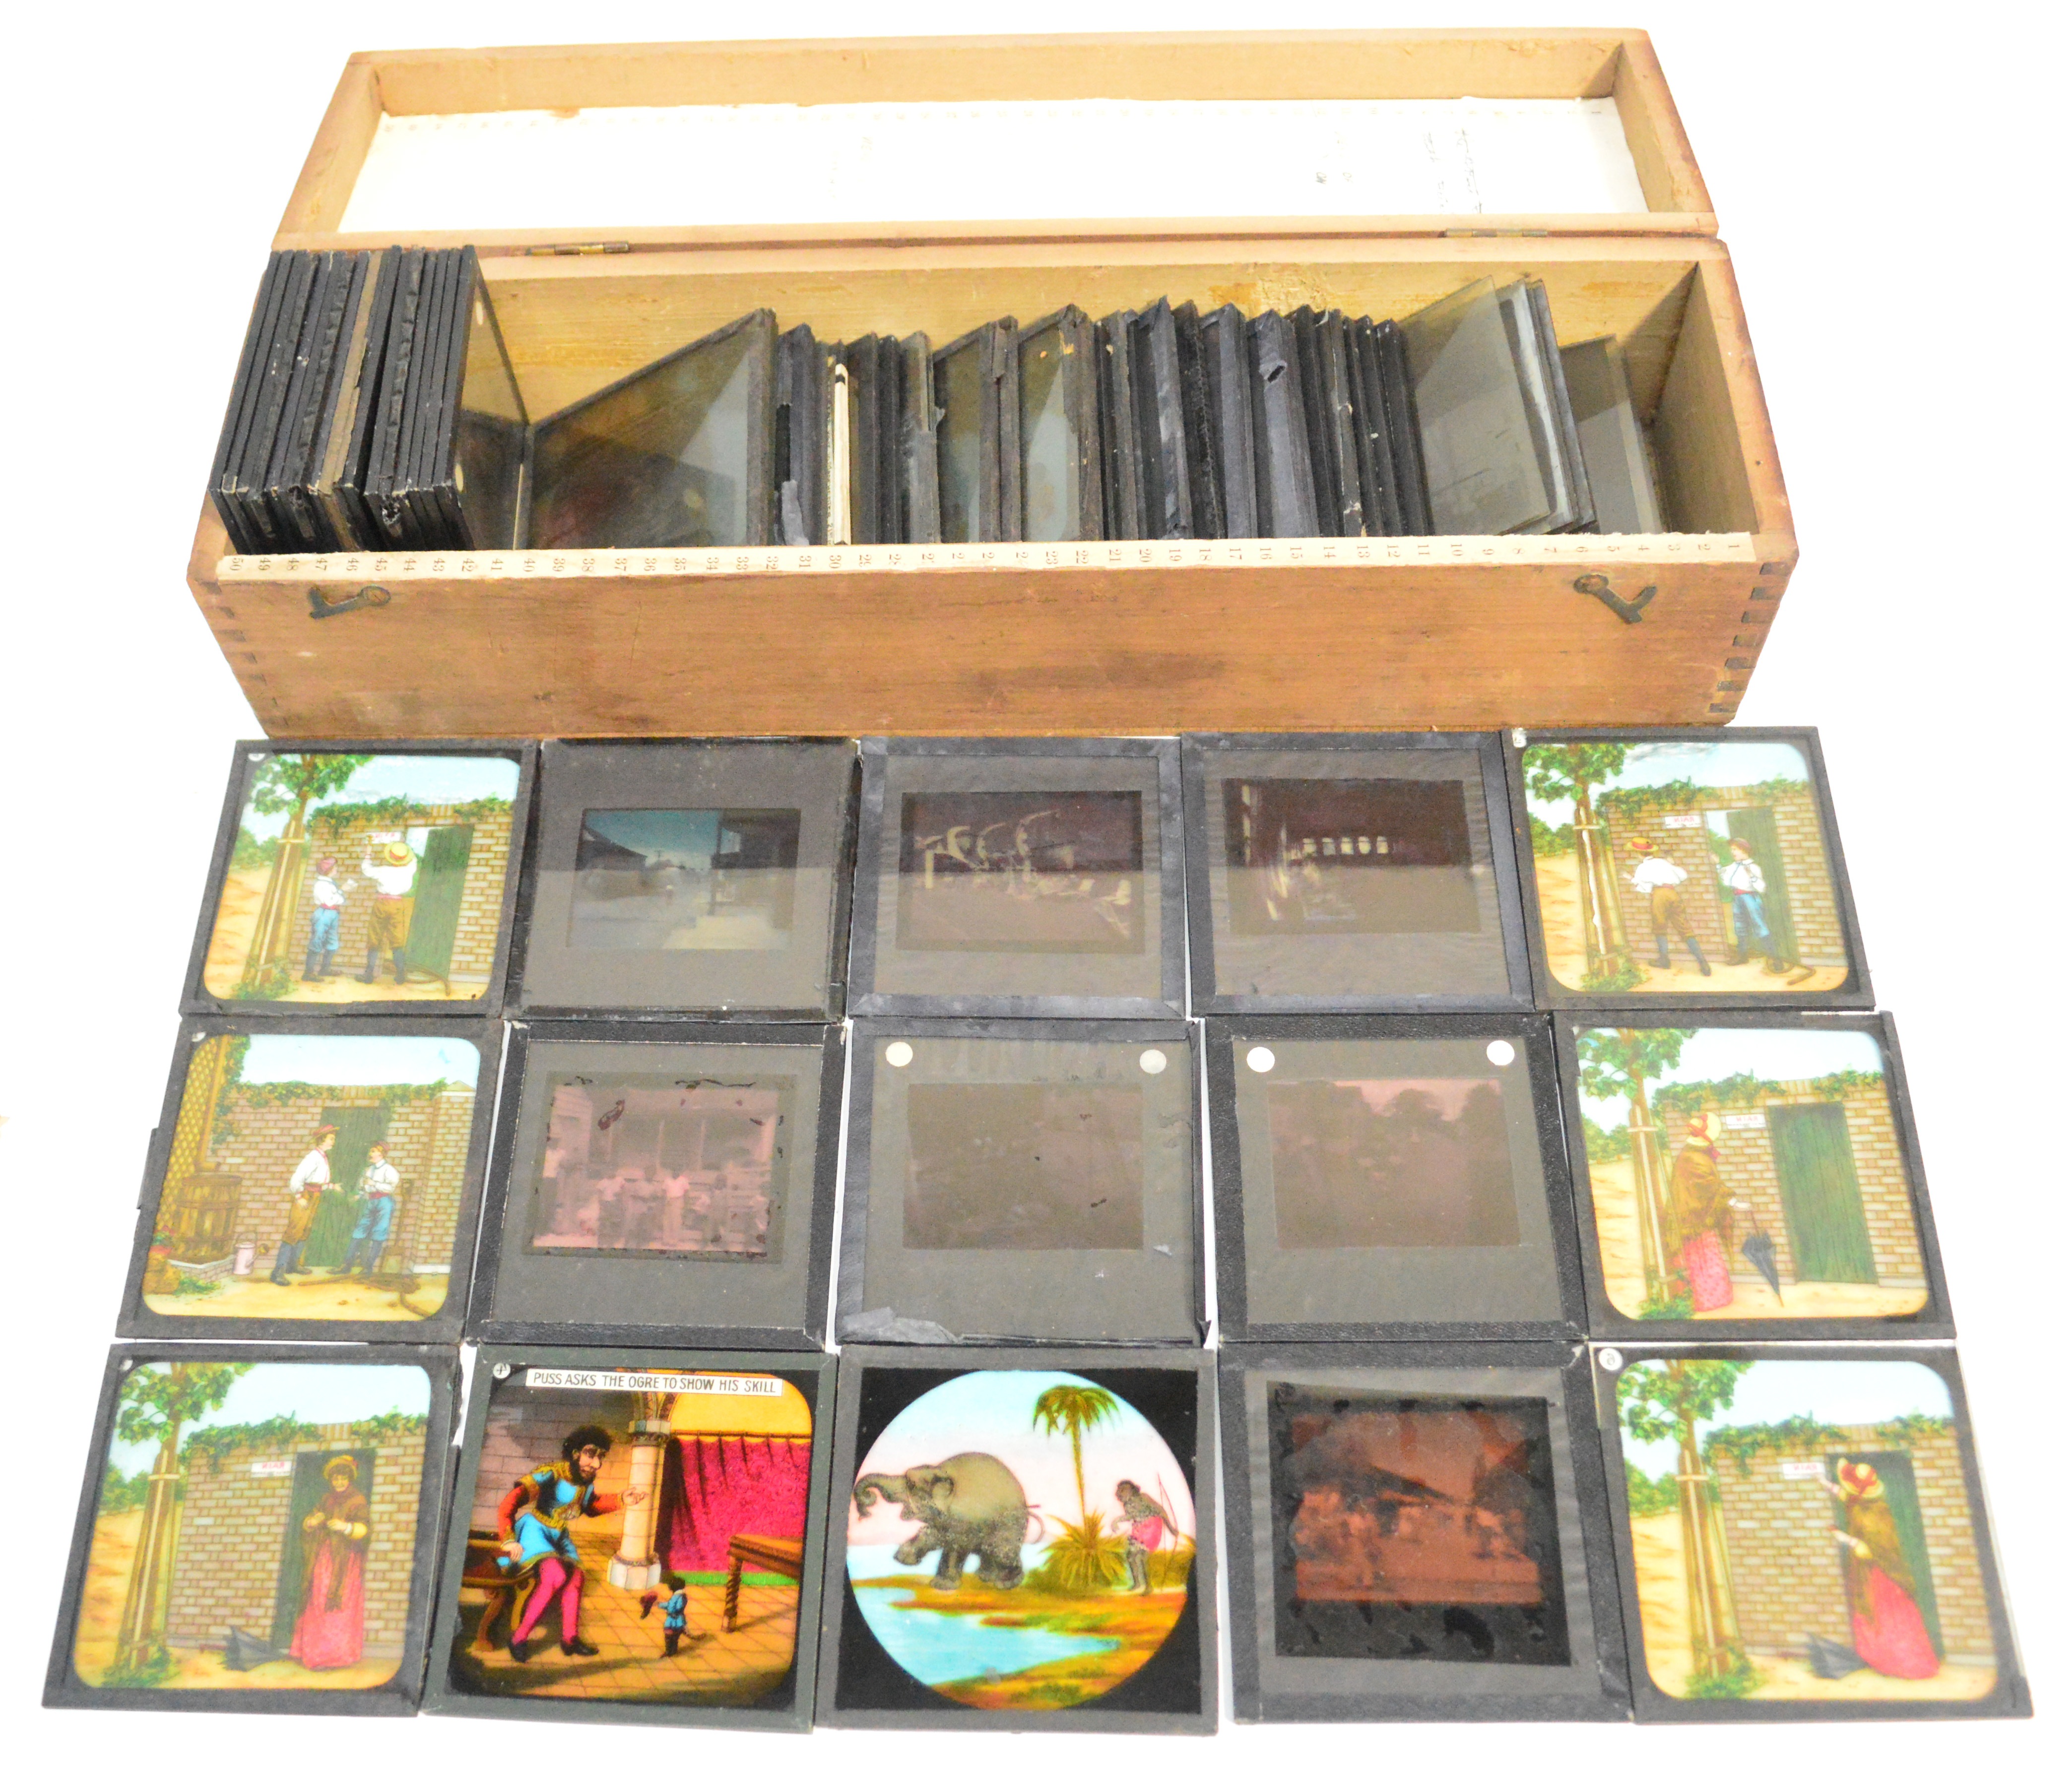 A collection of vintage magic lantern slides, some coloured, some black and white.